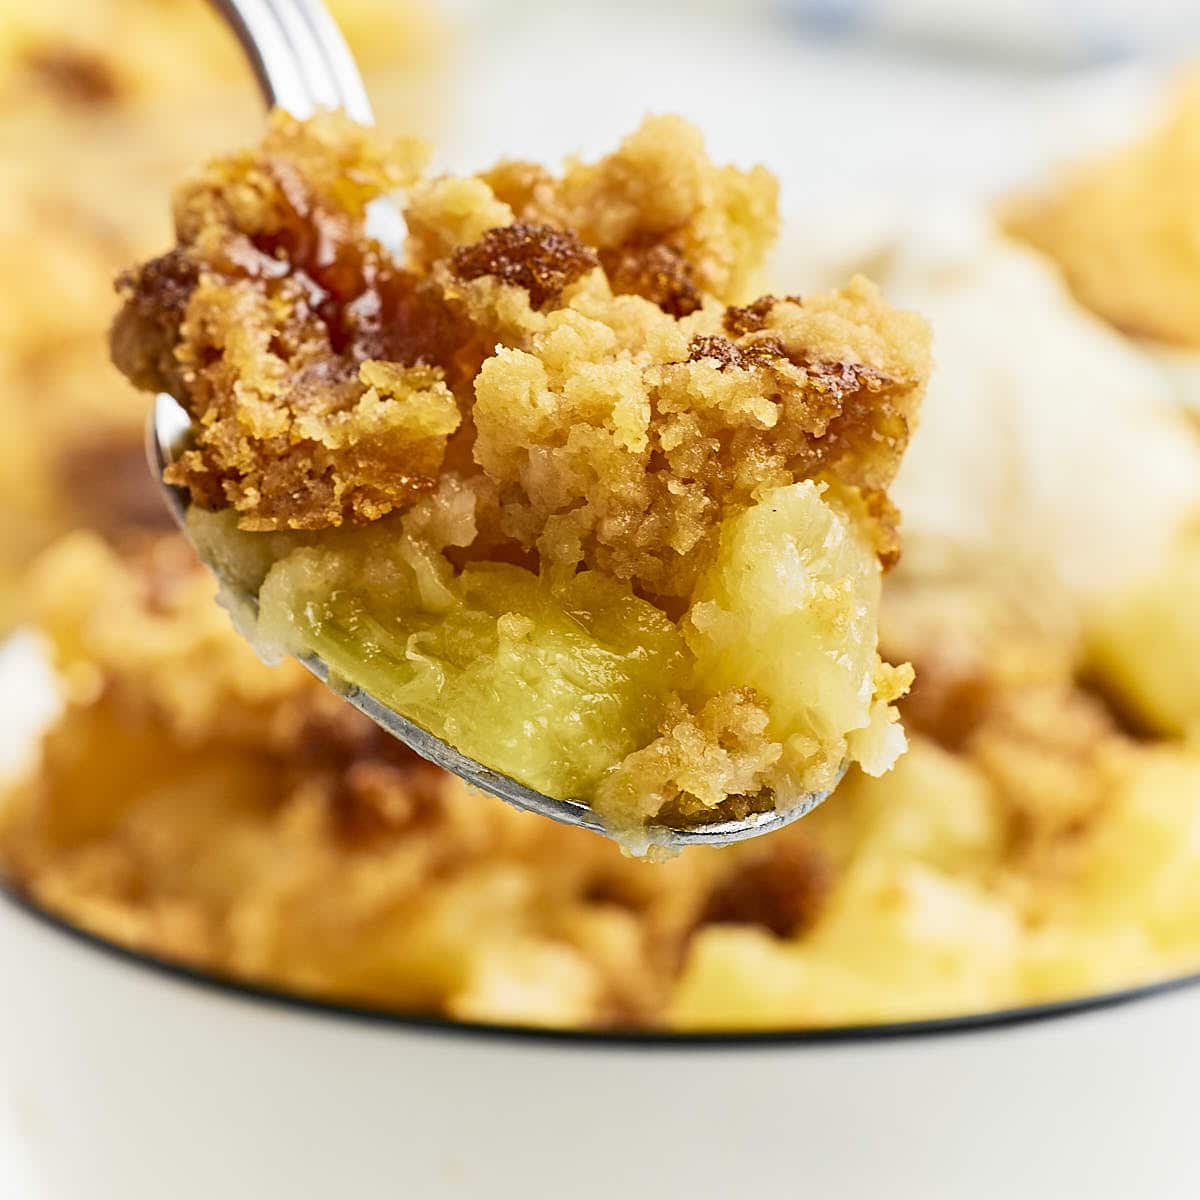 A forkful of warm Pineapple Dump Cake.